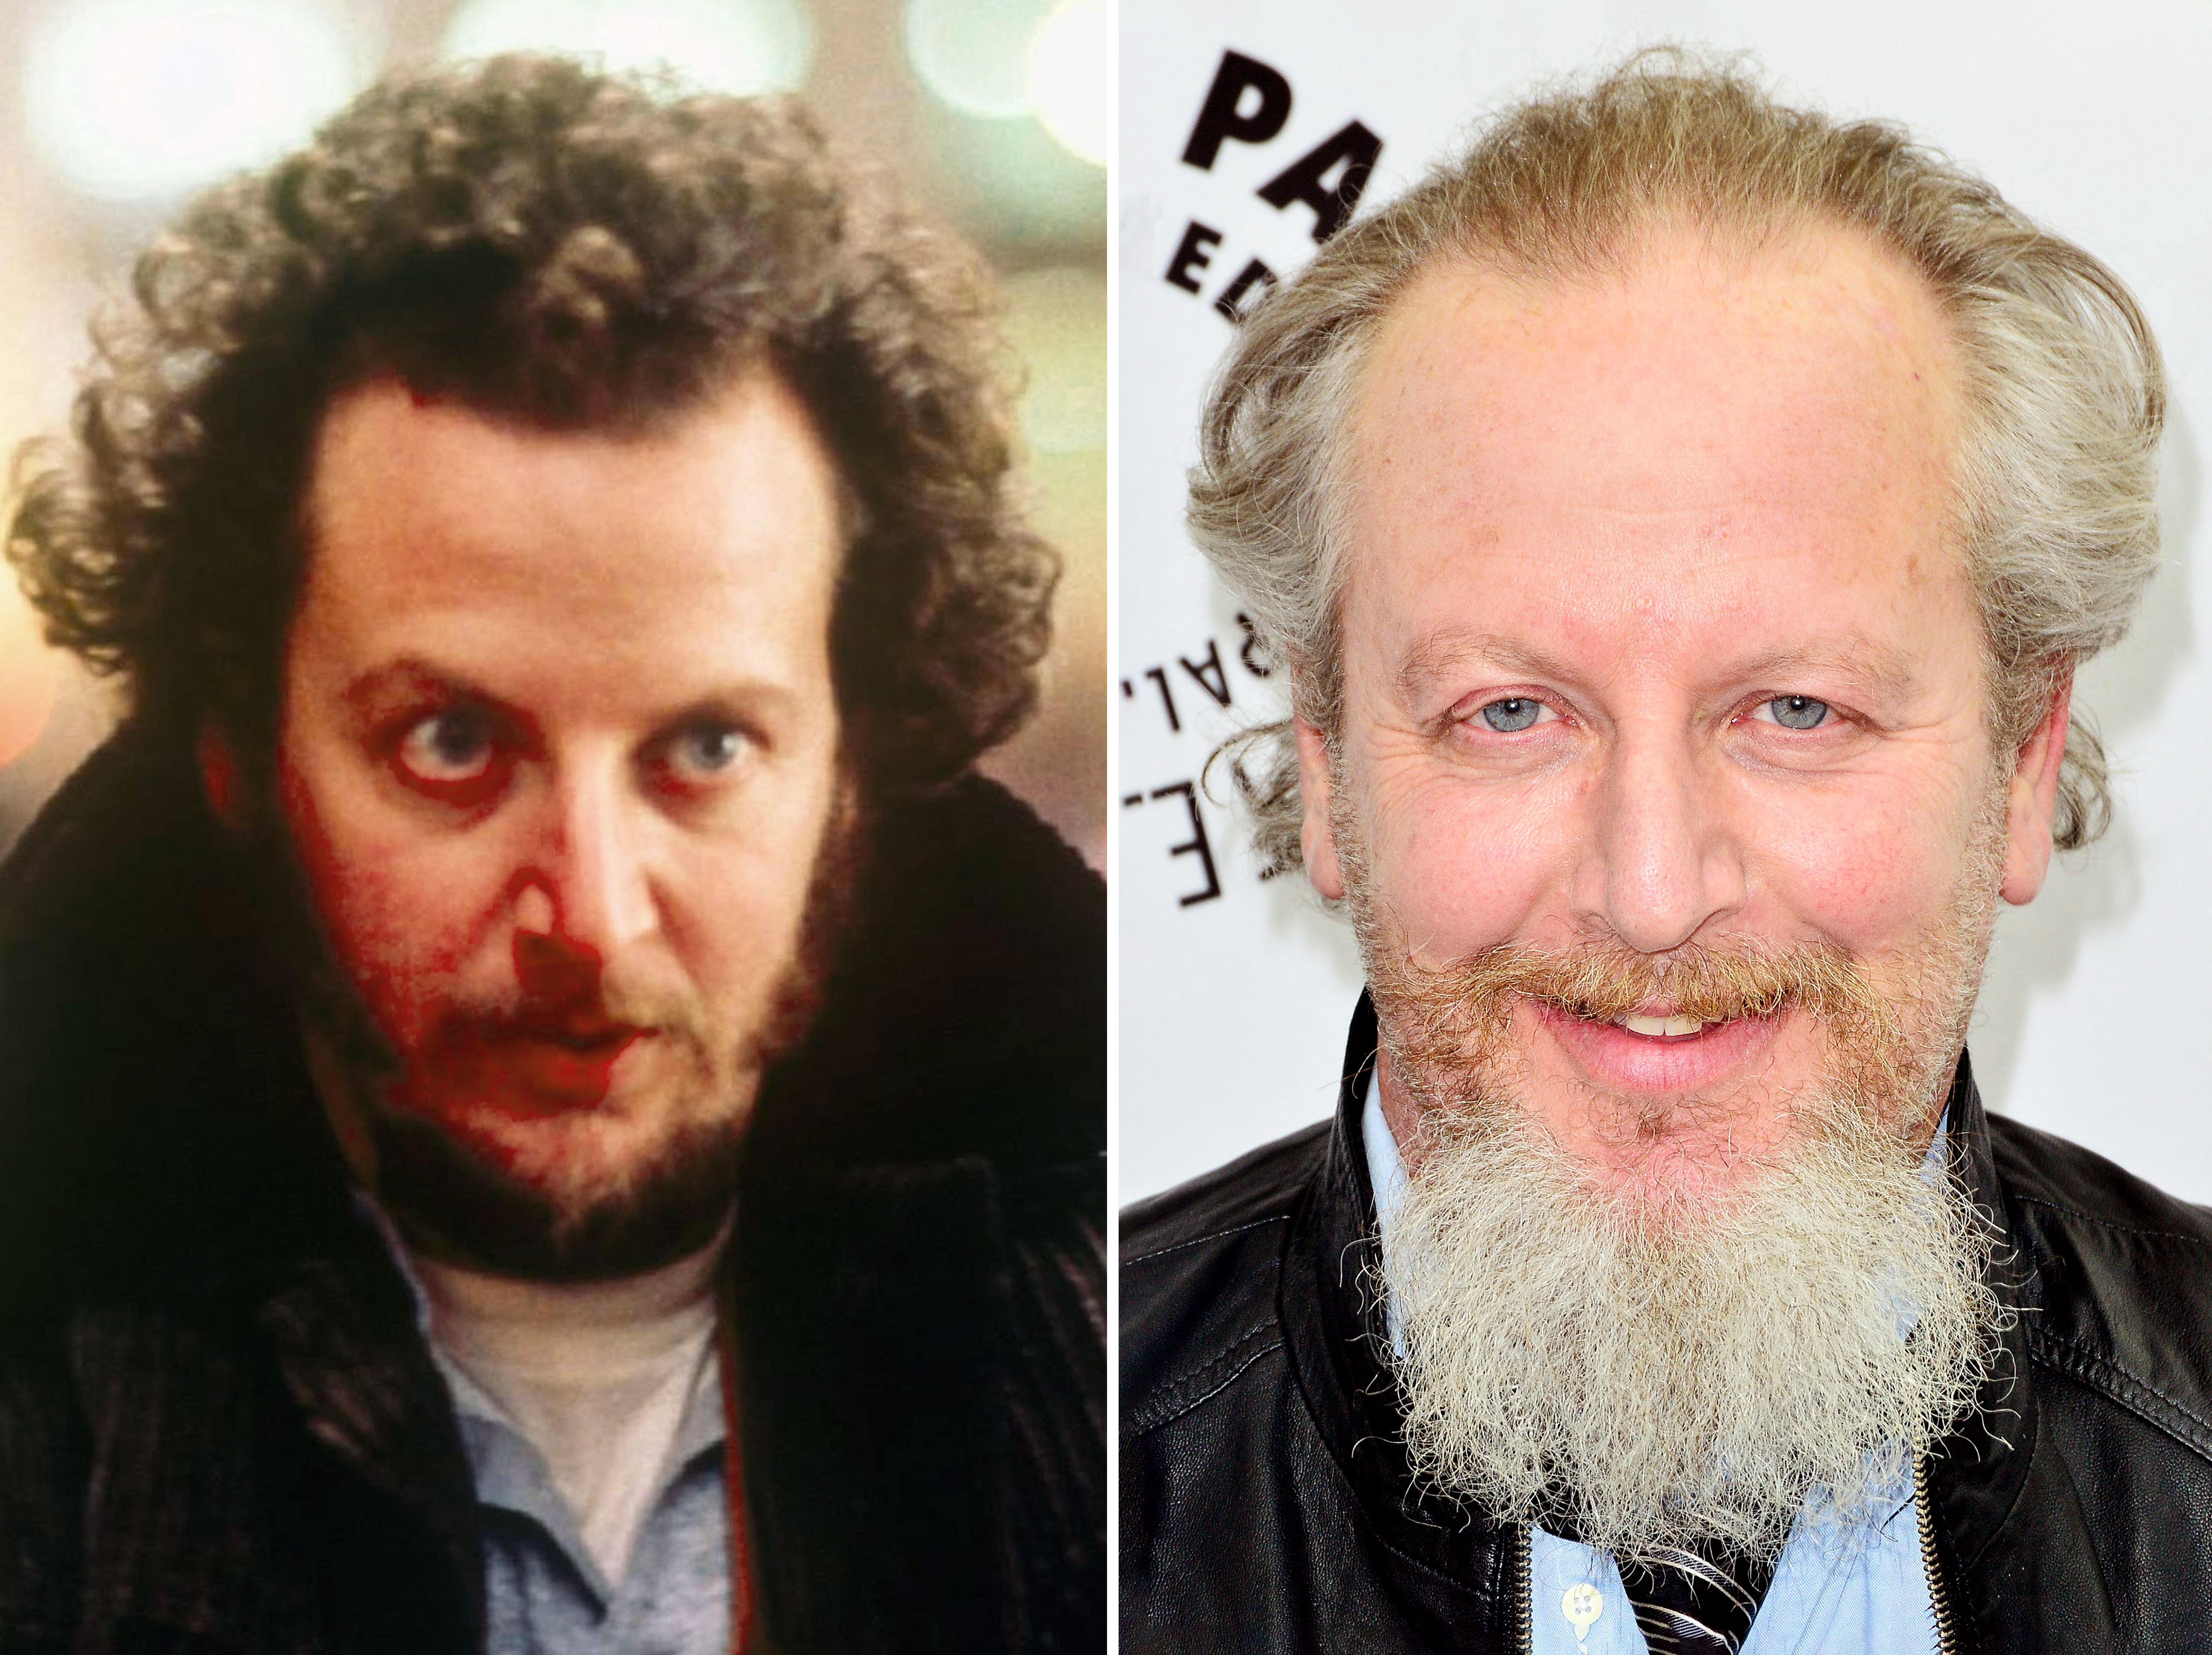 Daniel Stern as Merv Murchins in "Home Alone," 1990 | Daniel Stern at a Paley Center for Media event in Beverly Hills, California on July 9, 2014 | Sources: Facebook/Home Alone | Getty Images